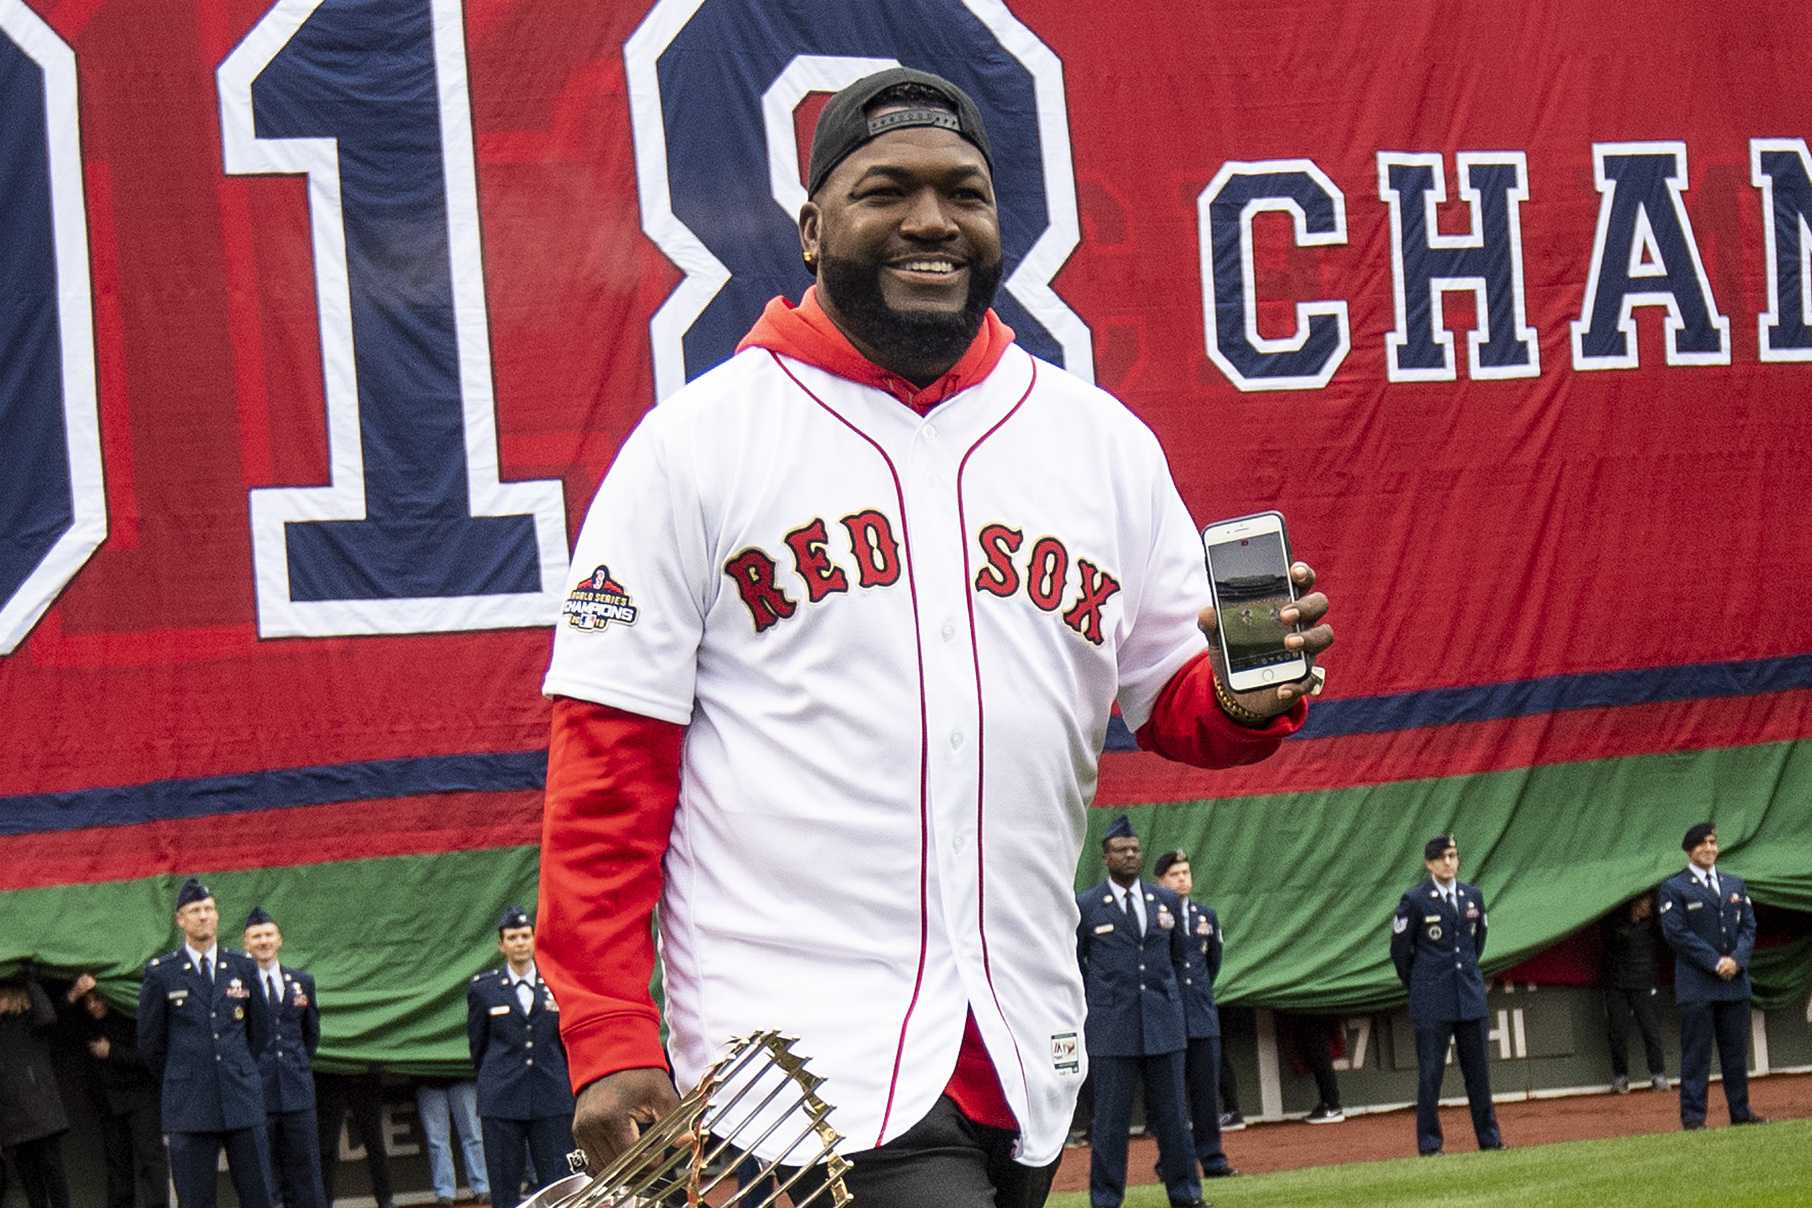 Former Red Sox Star David Ortiz 'Out of Danger' After Being Shot